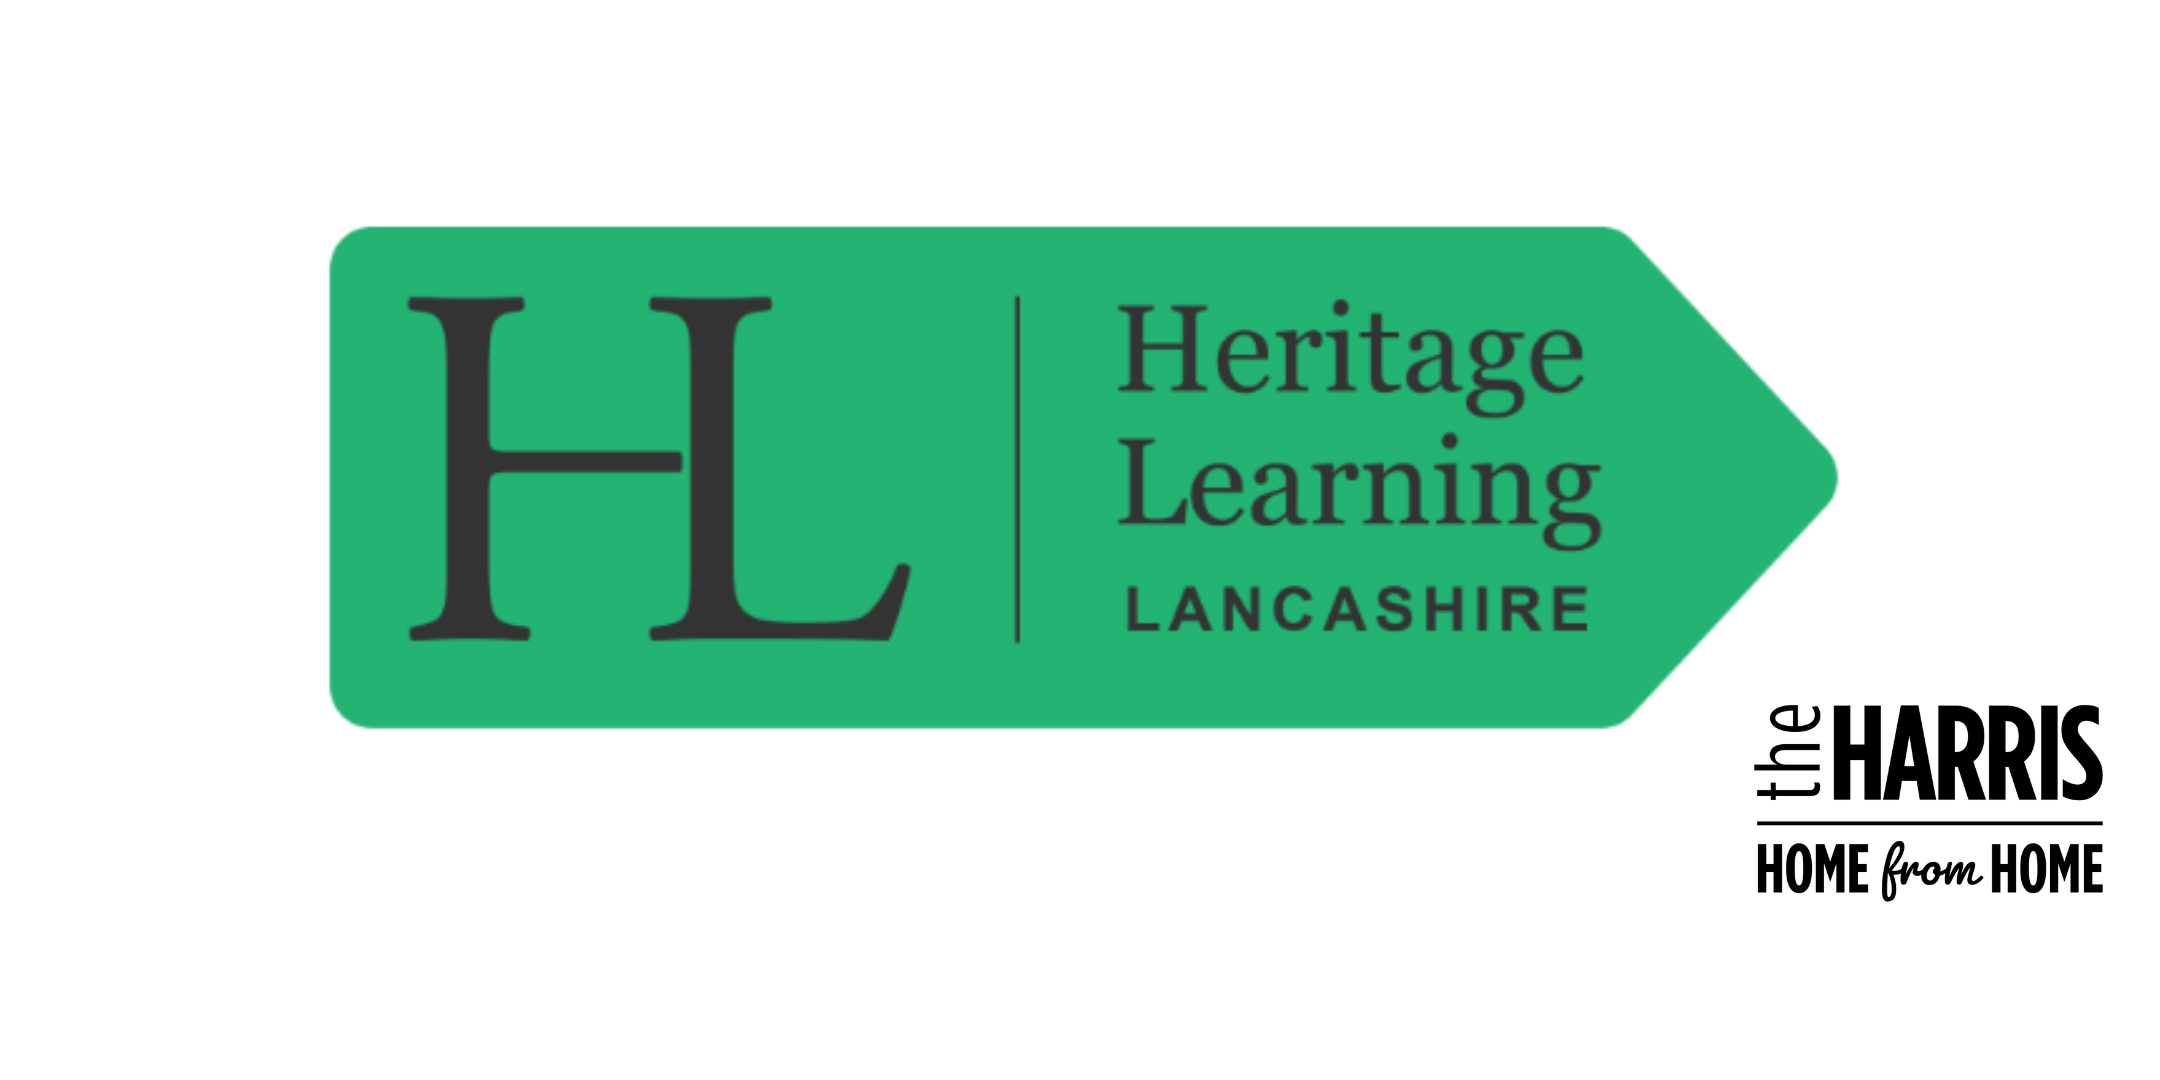 A green tag with Heritage Learning Lancashire written in black text.